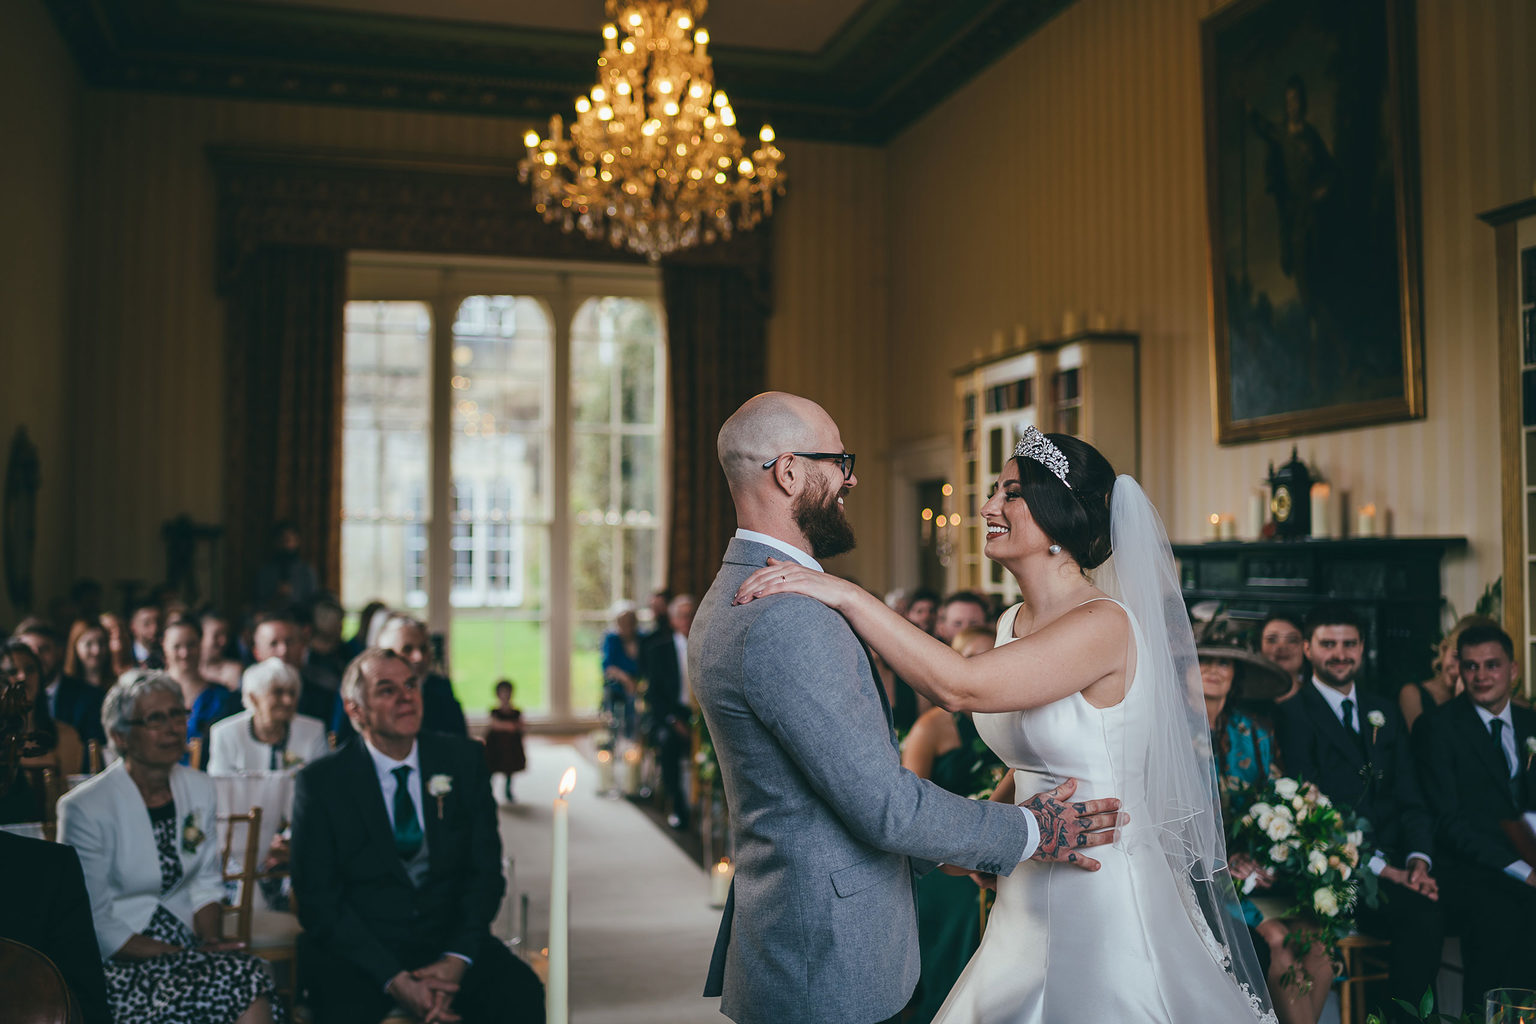 A bride and groom getting married during a wedding ceremony at Swinton Park Hotel in North Yorkshire. Photo by Joel Skingle.